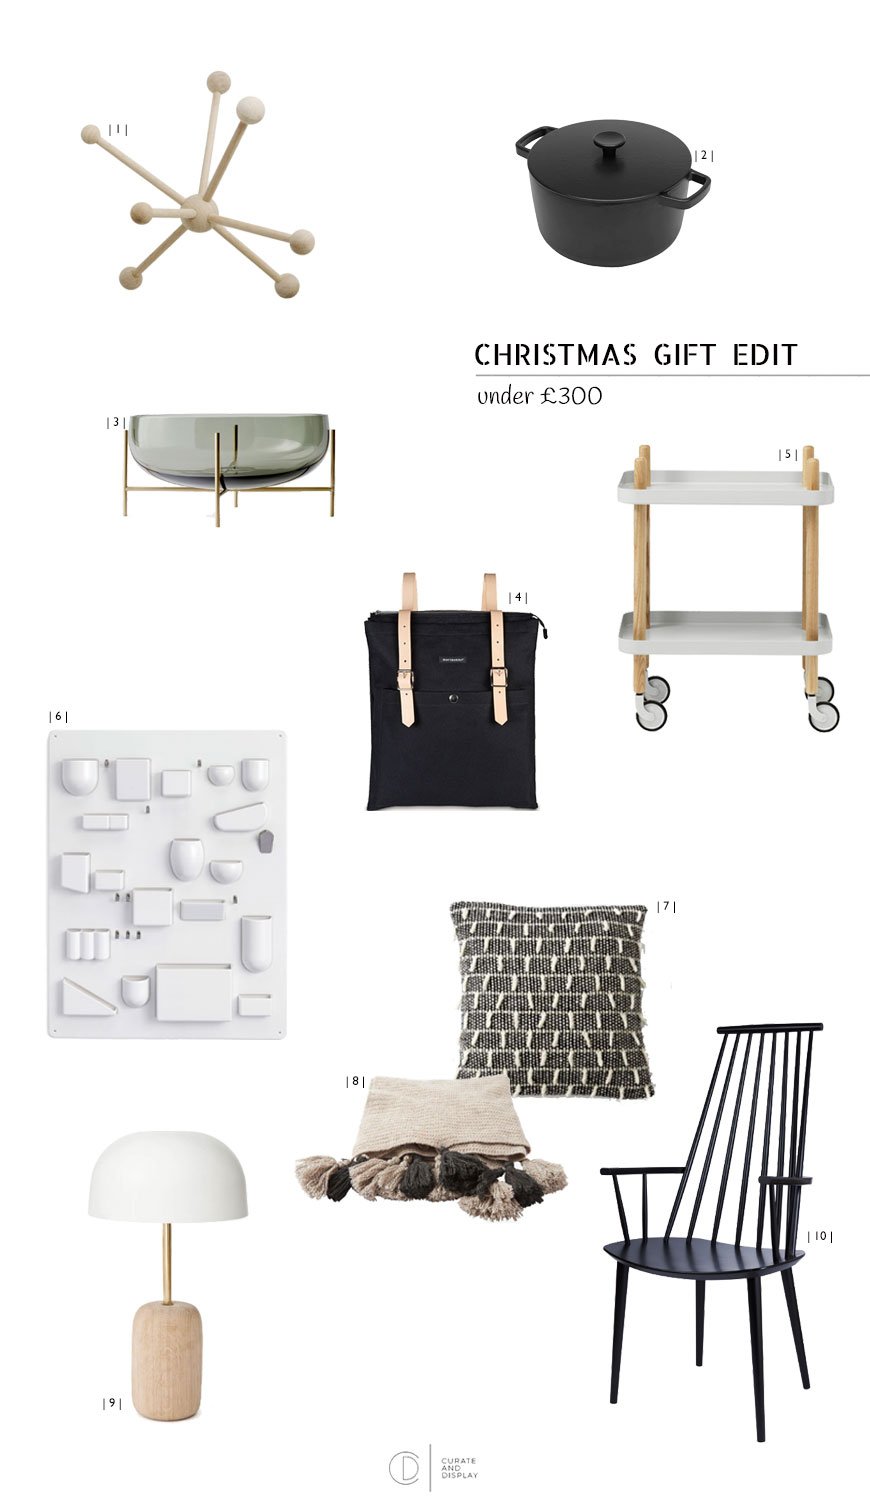 Christmas gift edit, Christmas 2017, Christmas gift guide, gift guide, gift for design lovers, interiors gifts